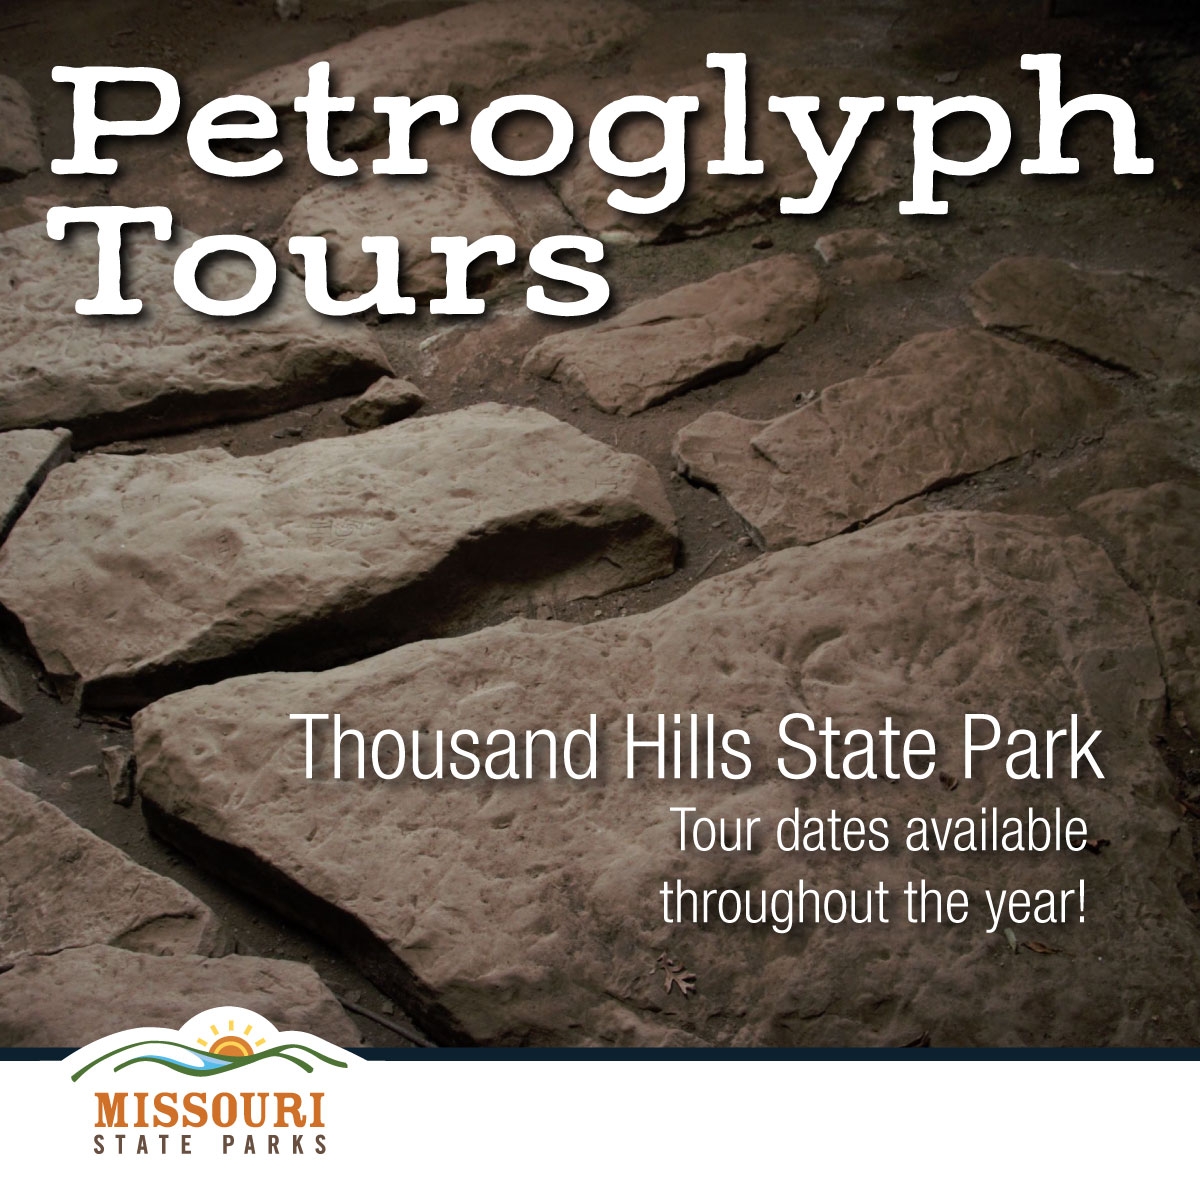 The next petroglyph tour at Thousand Hills State Park takes place on Friday, April 19. Learn more about this, and future tours, at ow.ly/6Ytc50ReqZF. #GetOutside #AdventureAwaits